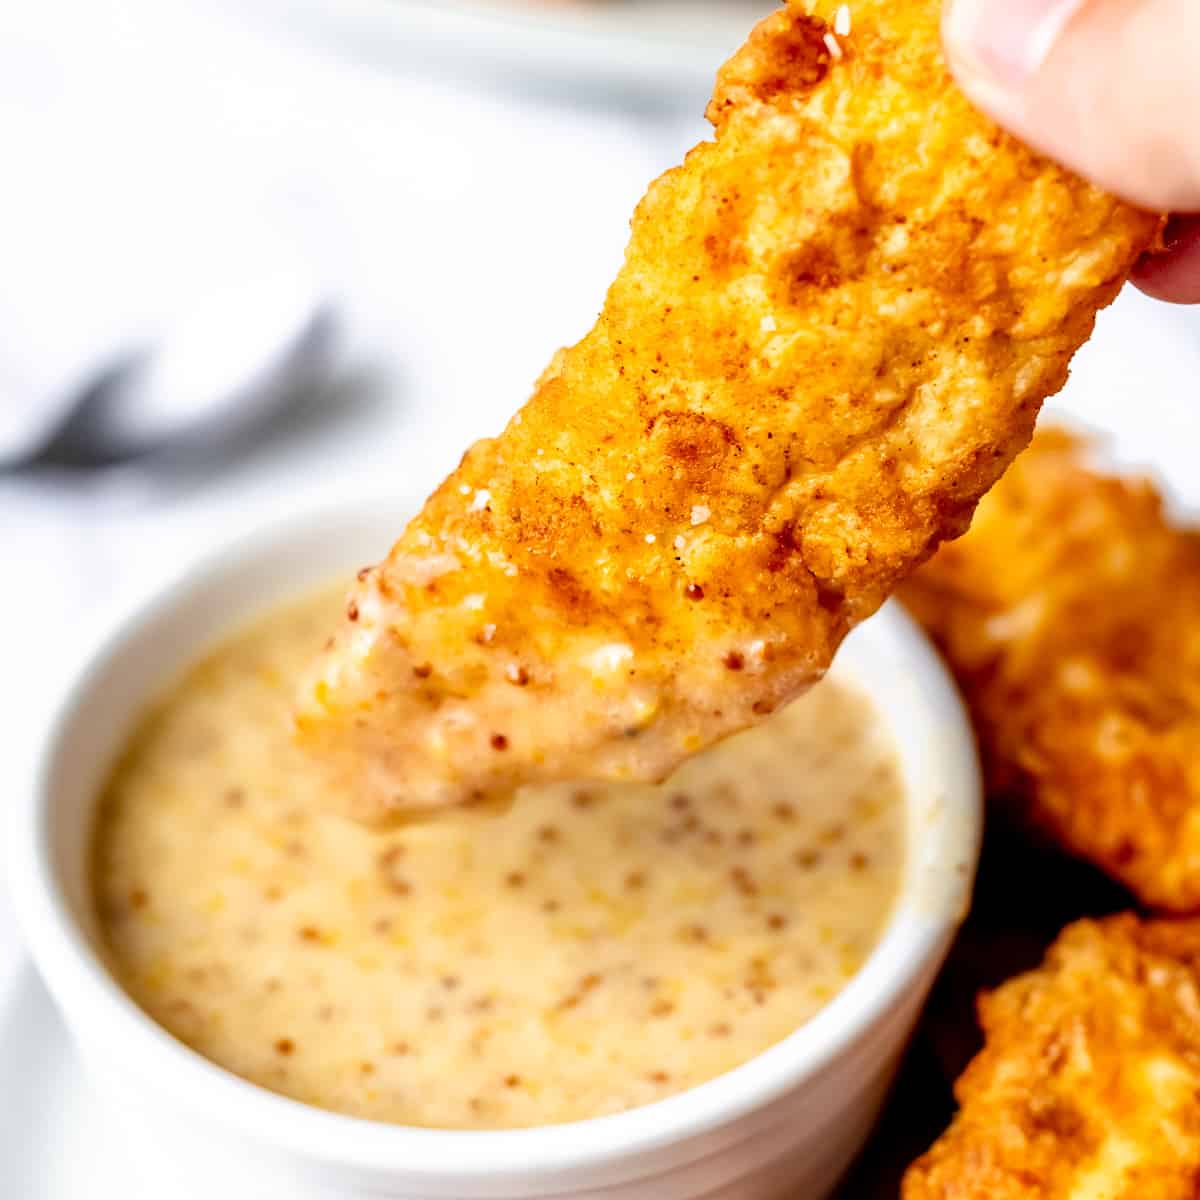 How to Make Irresistible Fried Chicken Strips: A Step-by-Step Guide